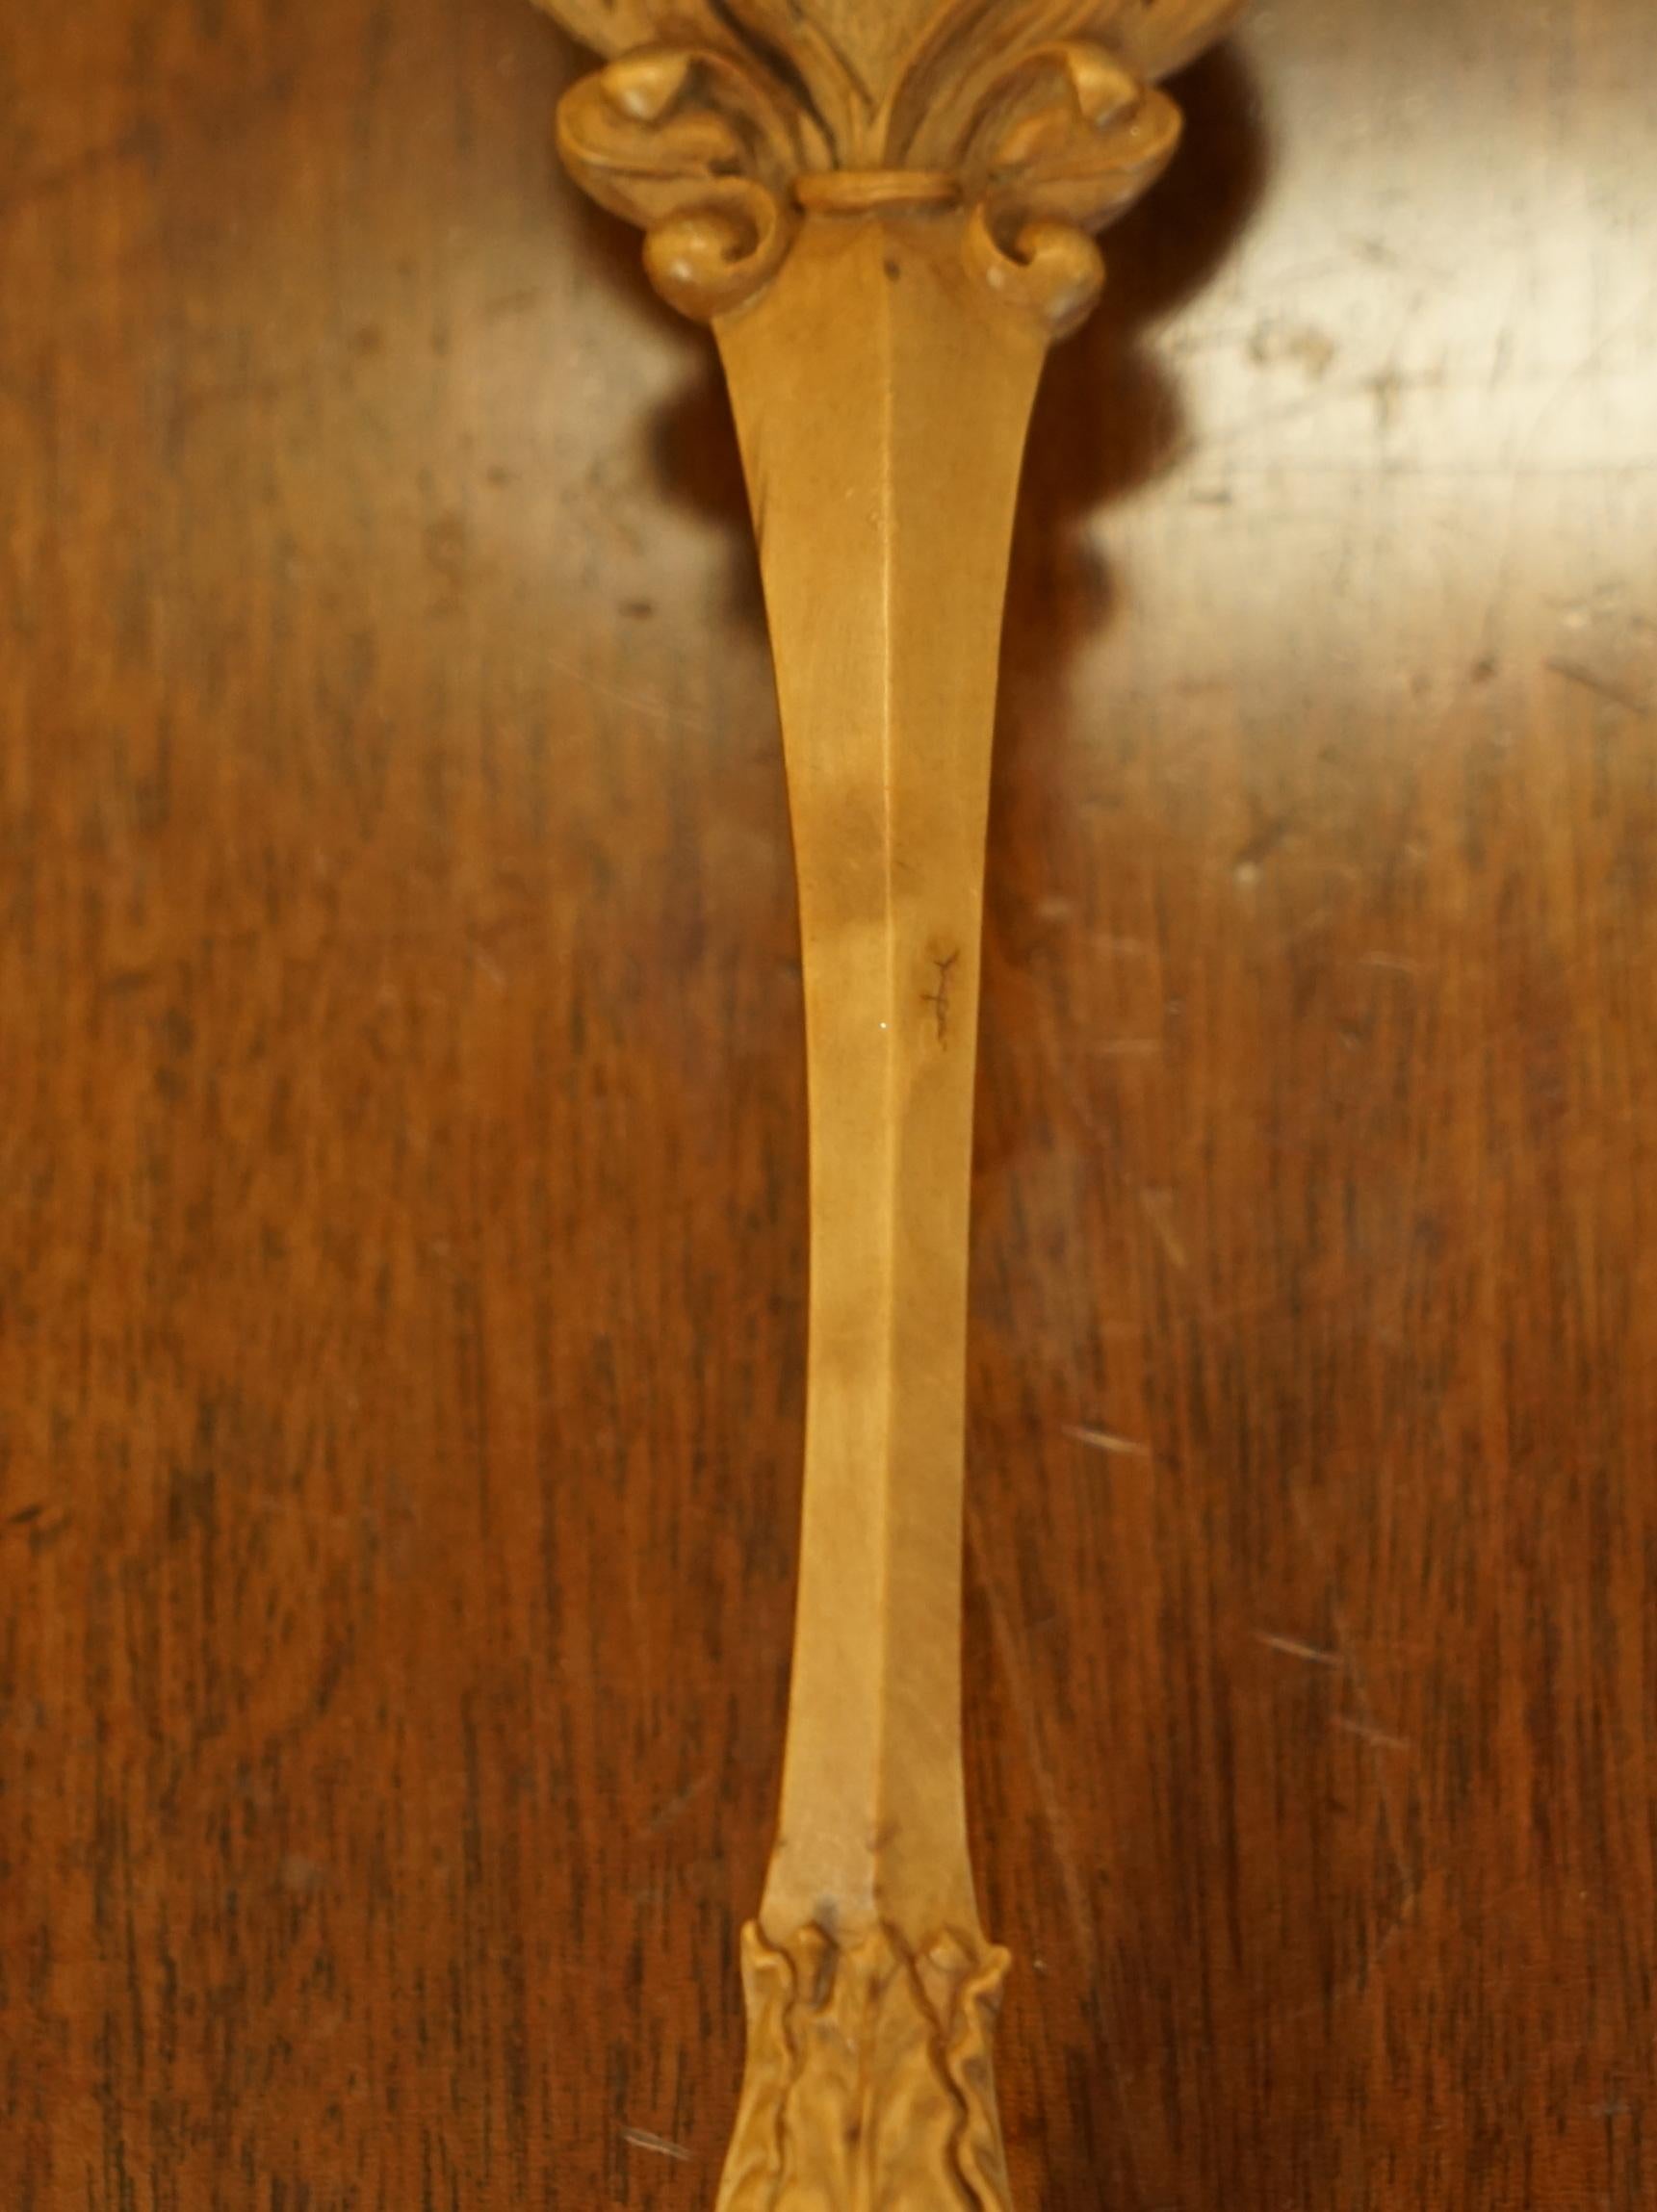 Early 20th Century ANTIQUE HAND CARVED CIRCA 1900 ROYAL ALBERT HALL RETIREMENT GiFT FORK & SPOON